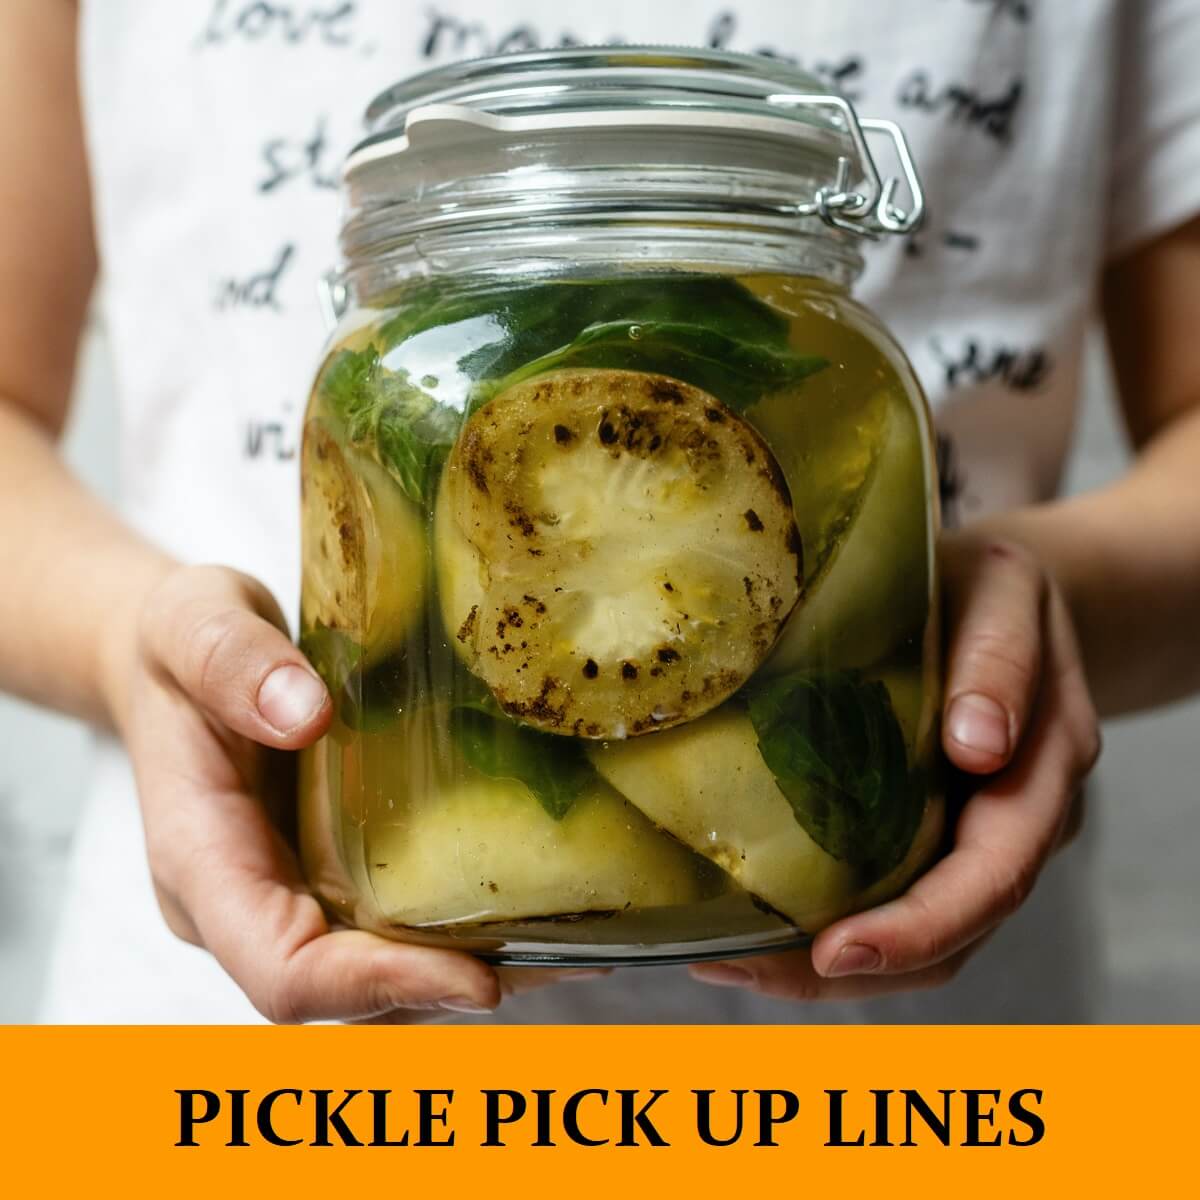 Pick Up Lines About Pickles